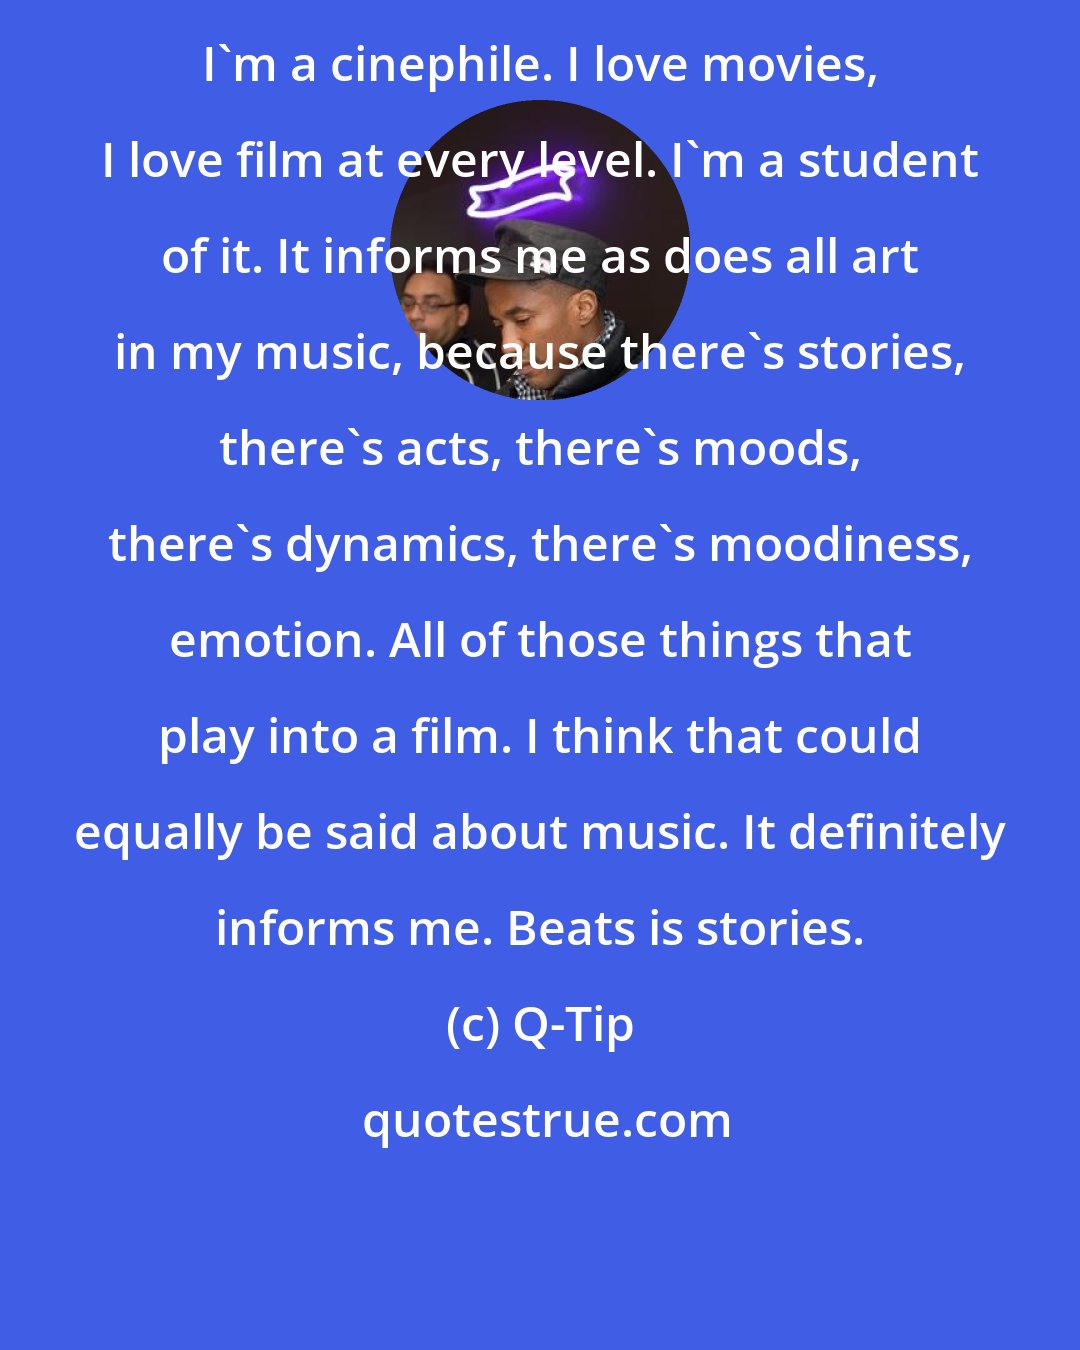 Q-Tip: I'm a cinephile. I love movies, I love film at every level. I'm a student of it. It informs me as does all art in my music, because there's stories, there's acts, there's moods, there's dynamics, there's moodiness, emotion. All of those things that play into a film. I think that could equally be said about music. It definitely informs me. Beats is stories.